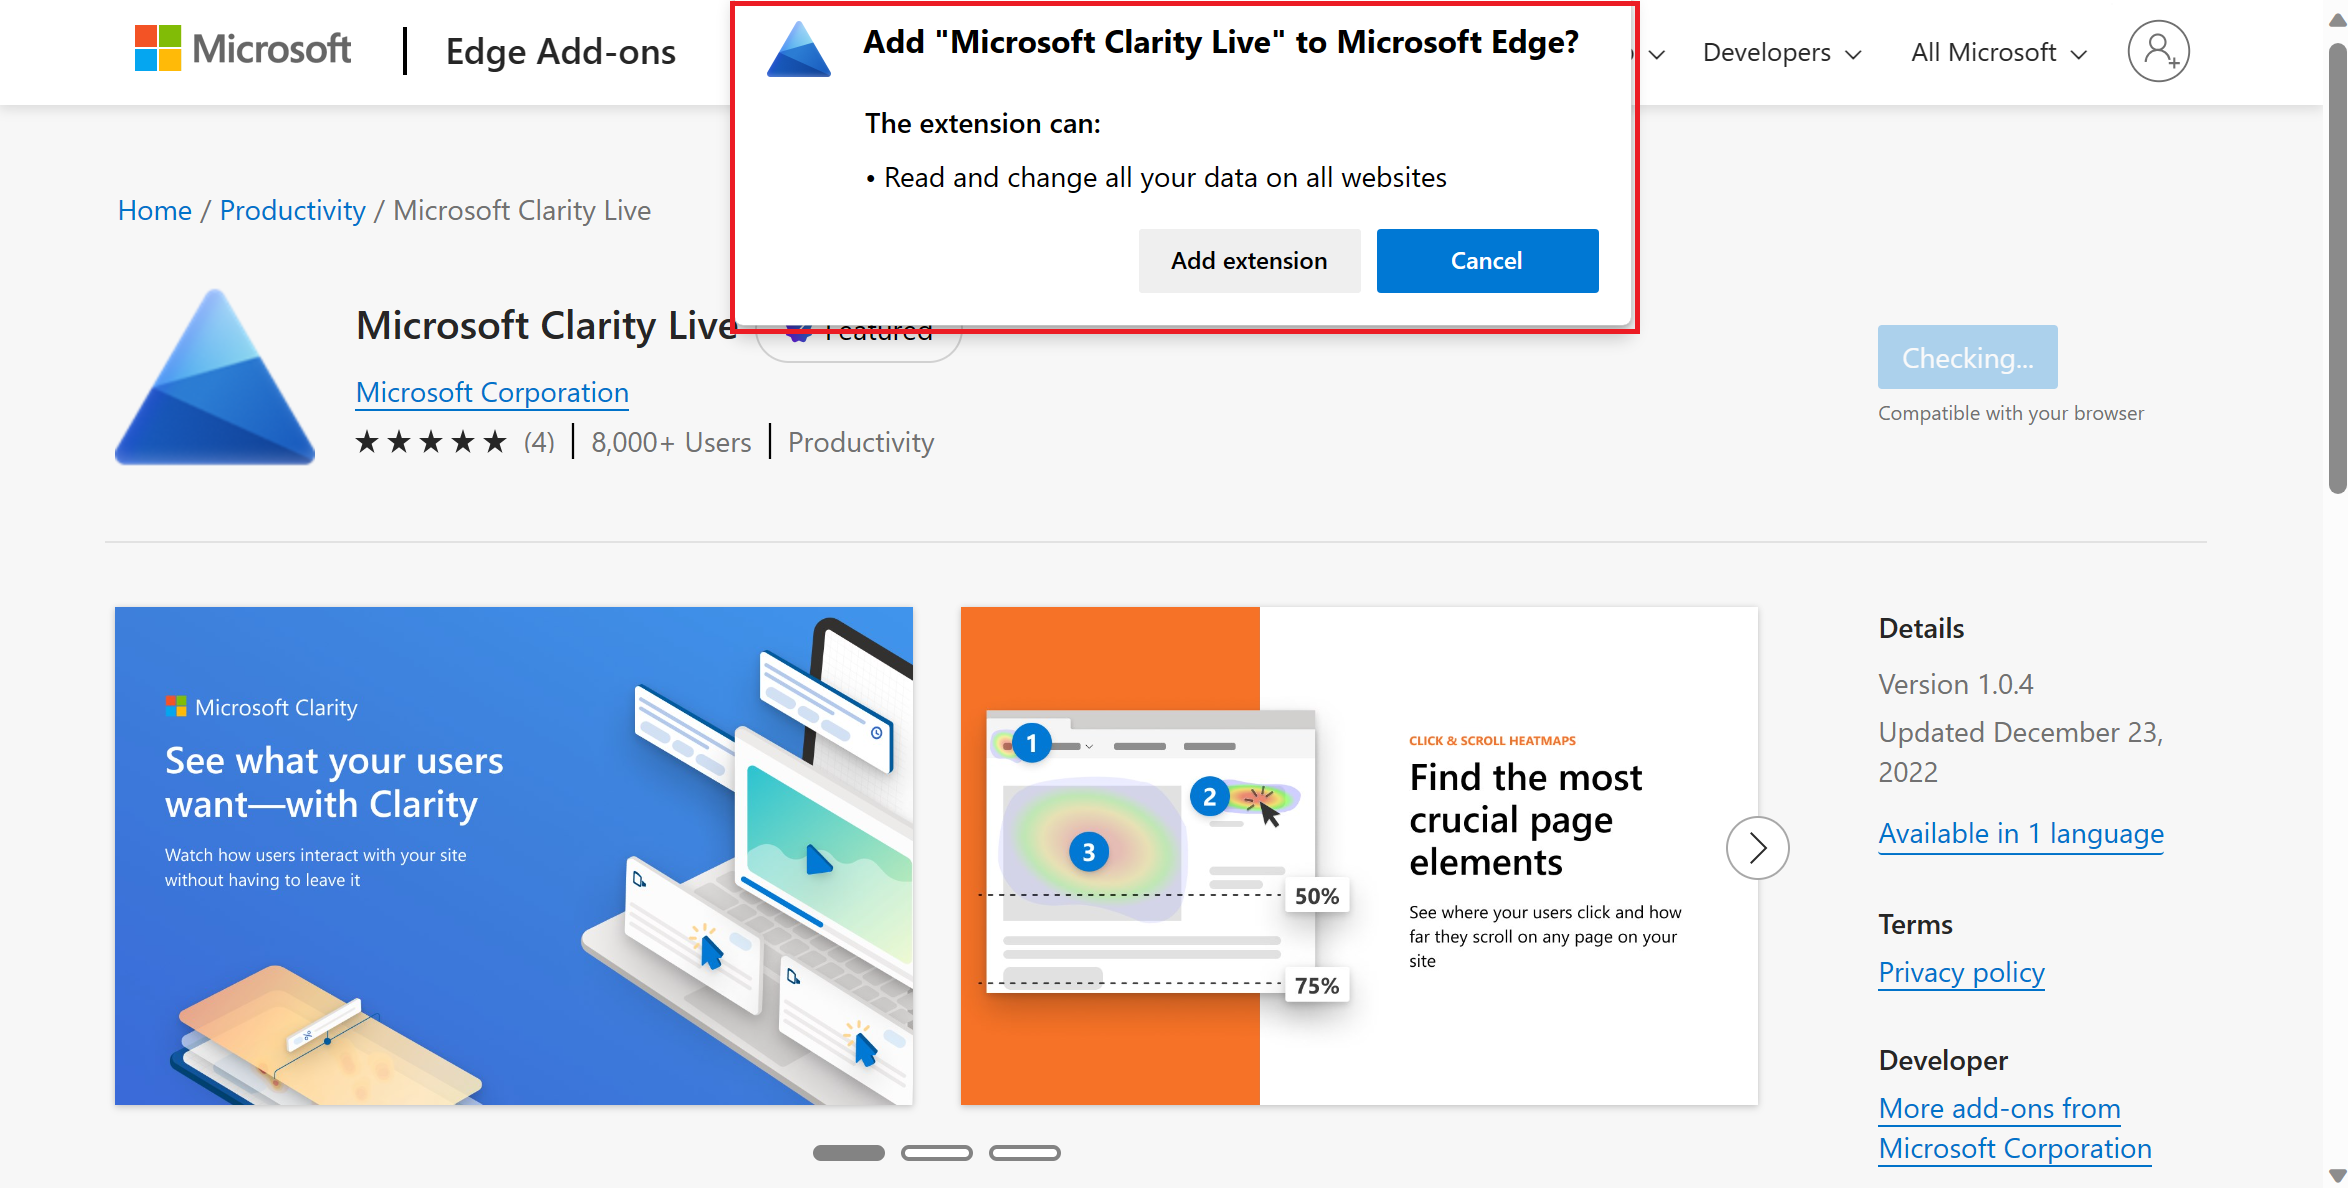 Confirm add extension on pop-up window in edge.